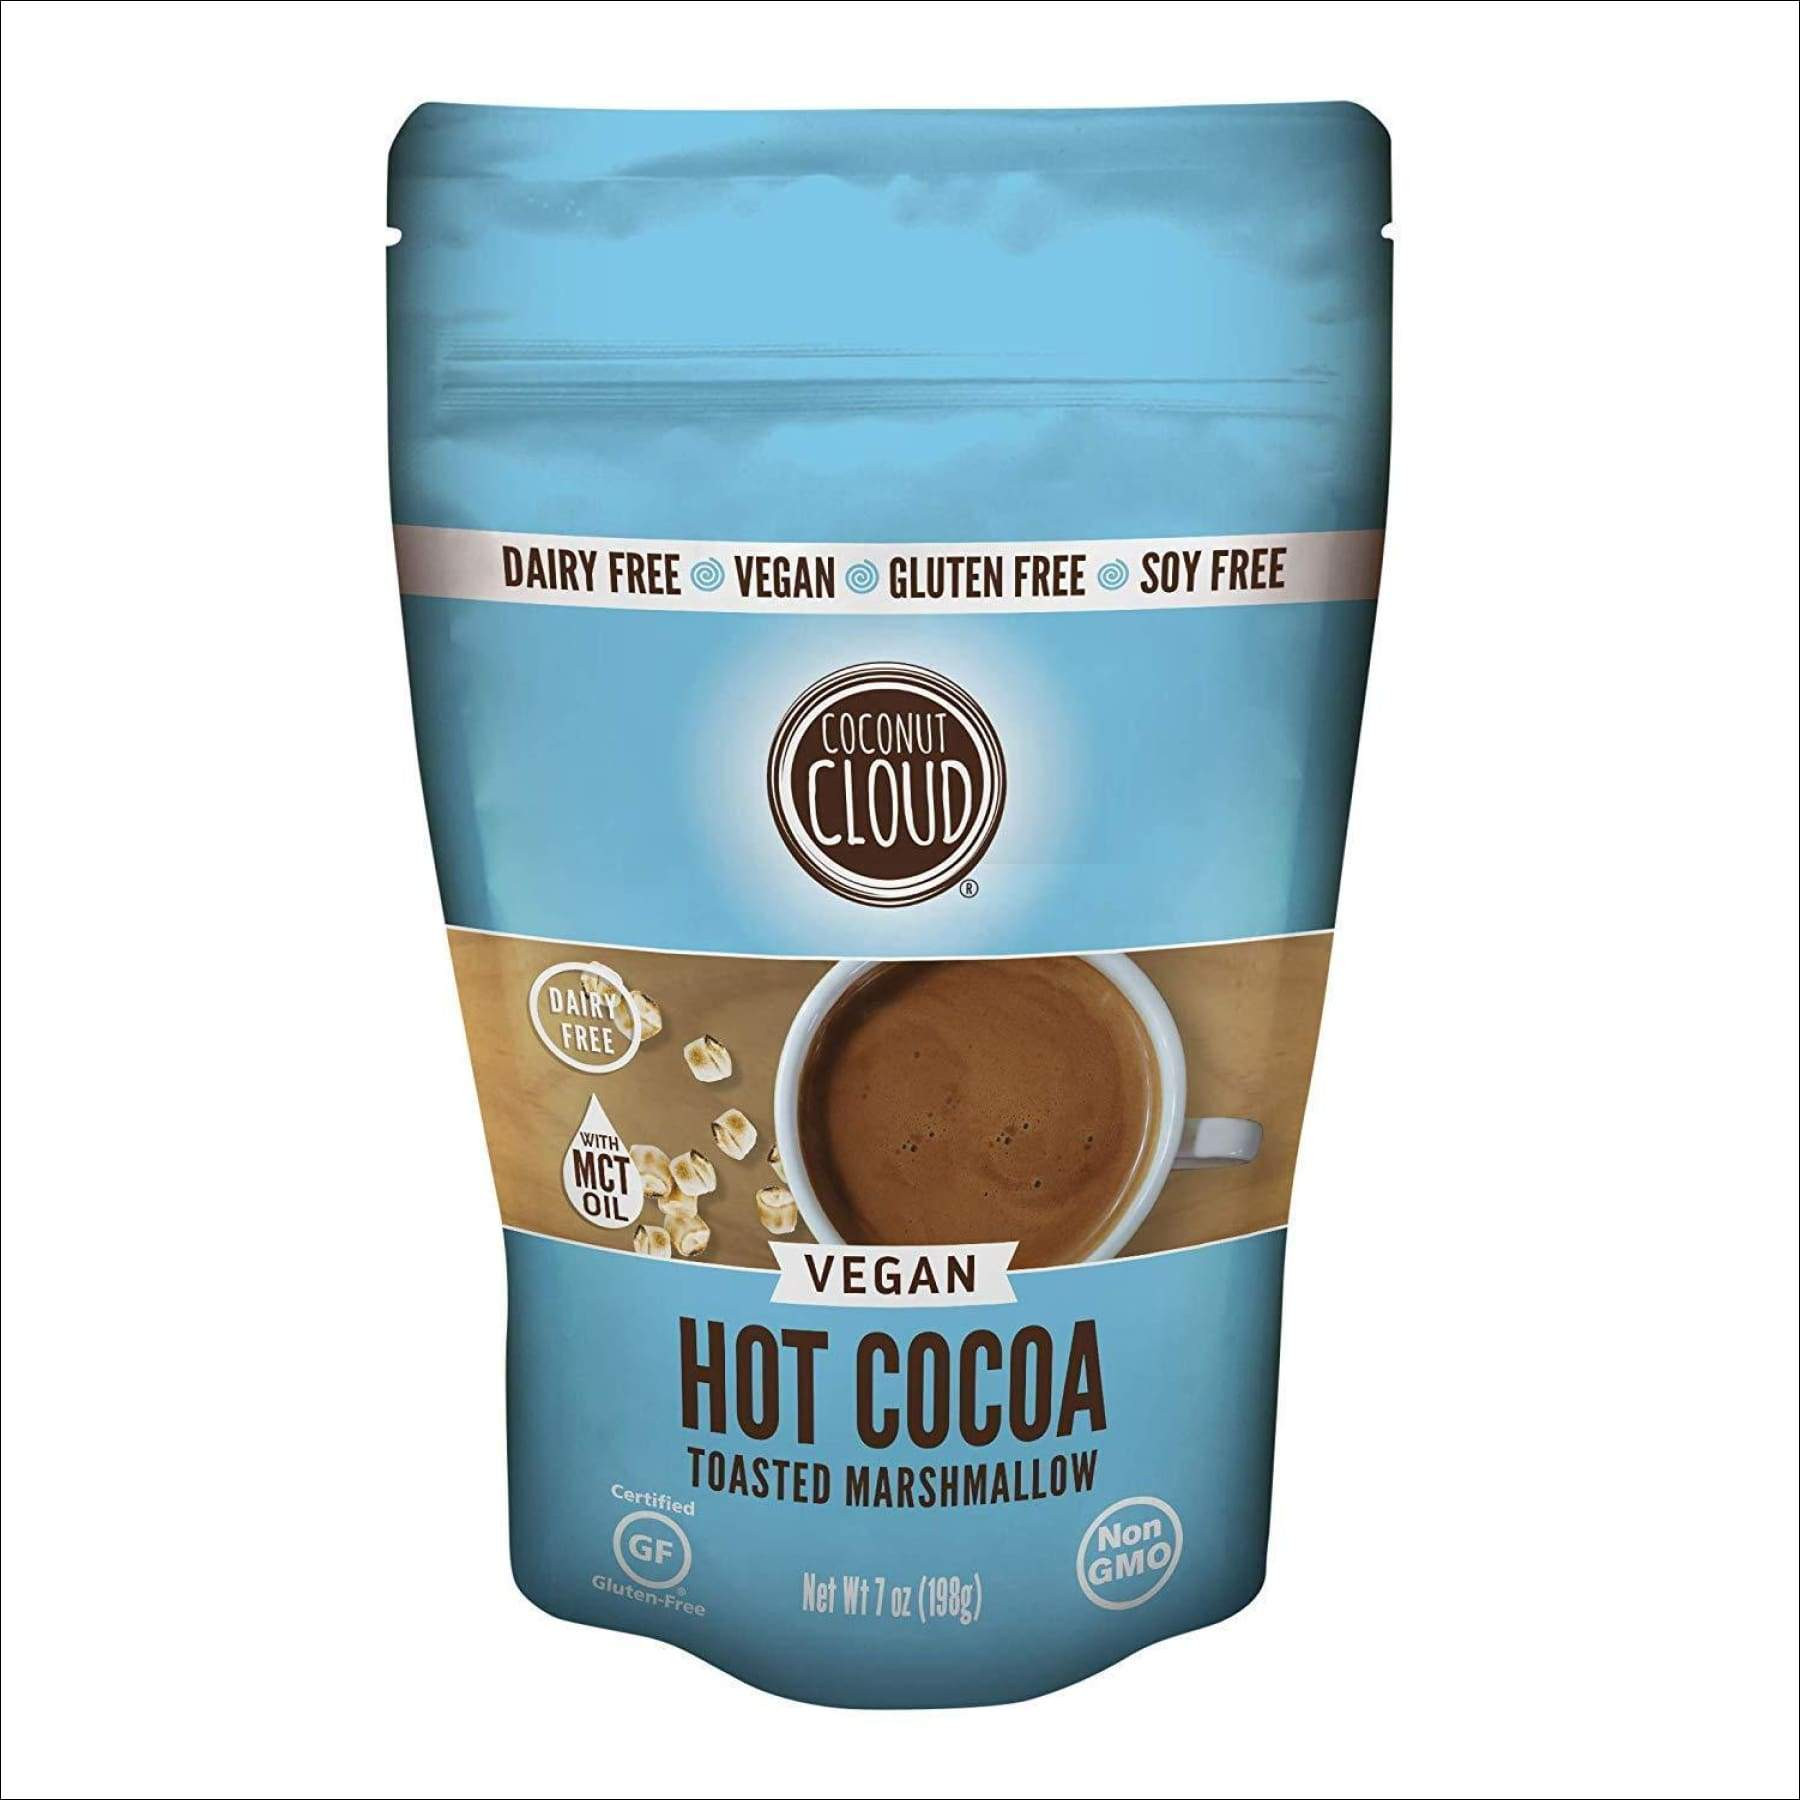 Dairy Free Cocoa Powder
 Coconut Cloud Dairy Free Instant Hot Cocoa Mix